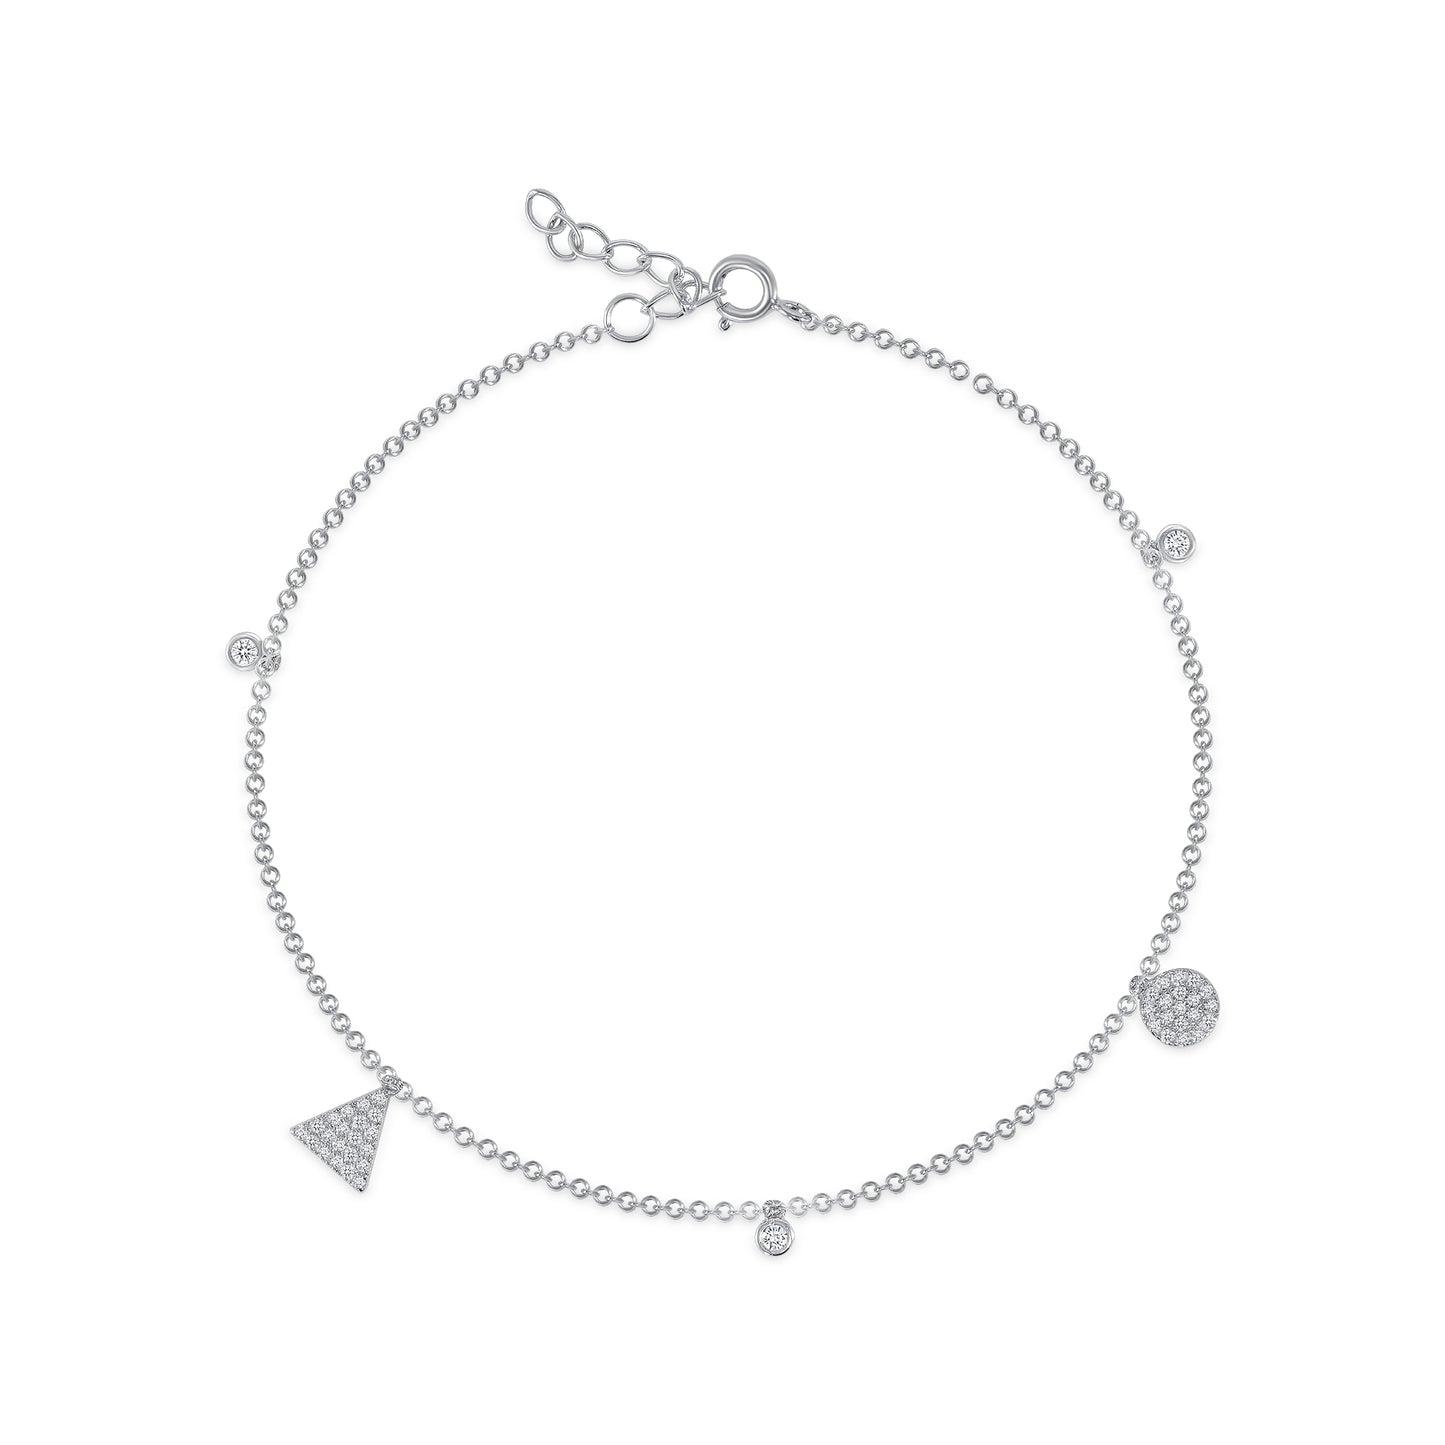 BF0108. Silver 925 Rhodium Plated Circle and Triangle Design Anklet